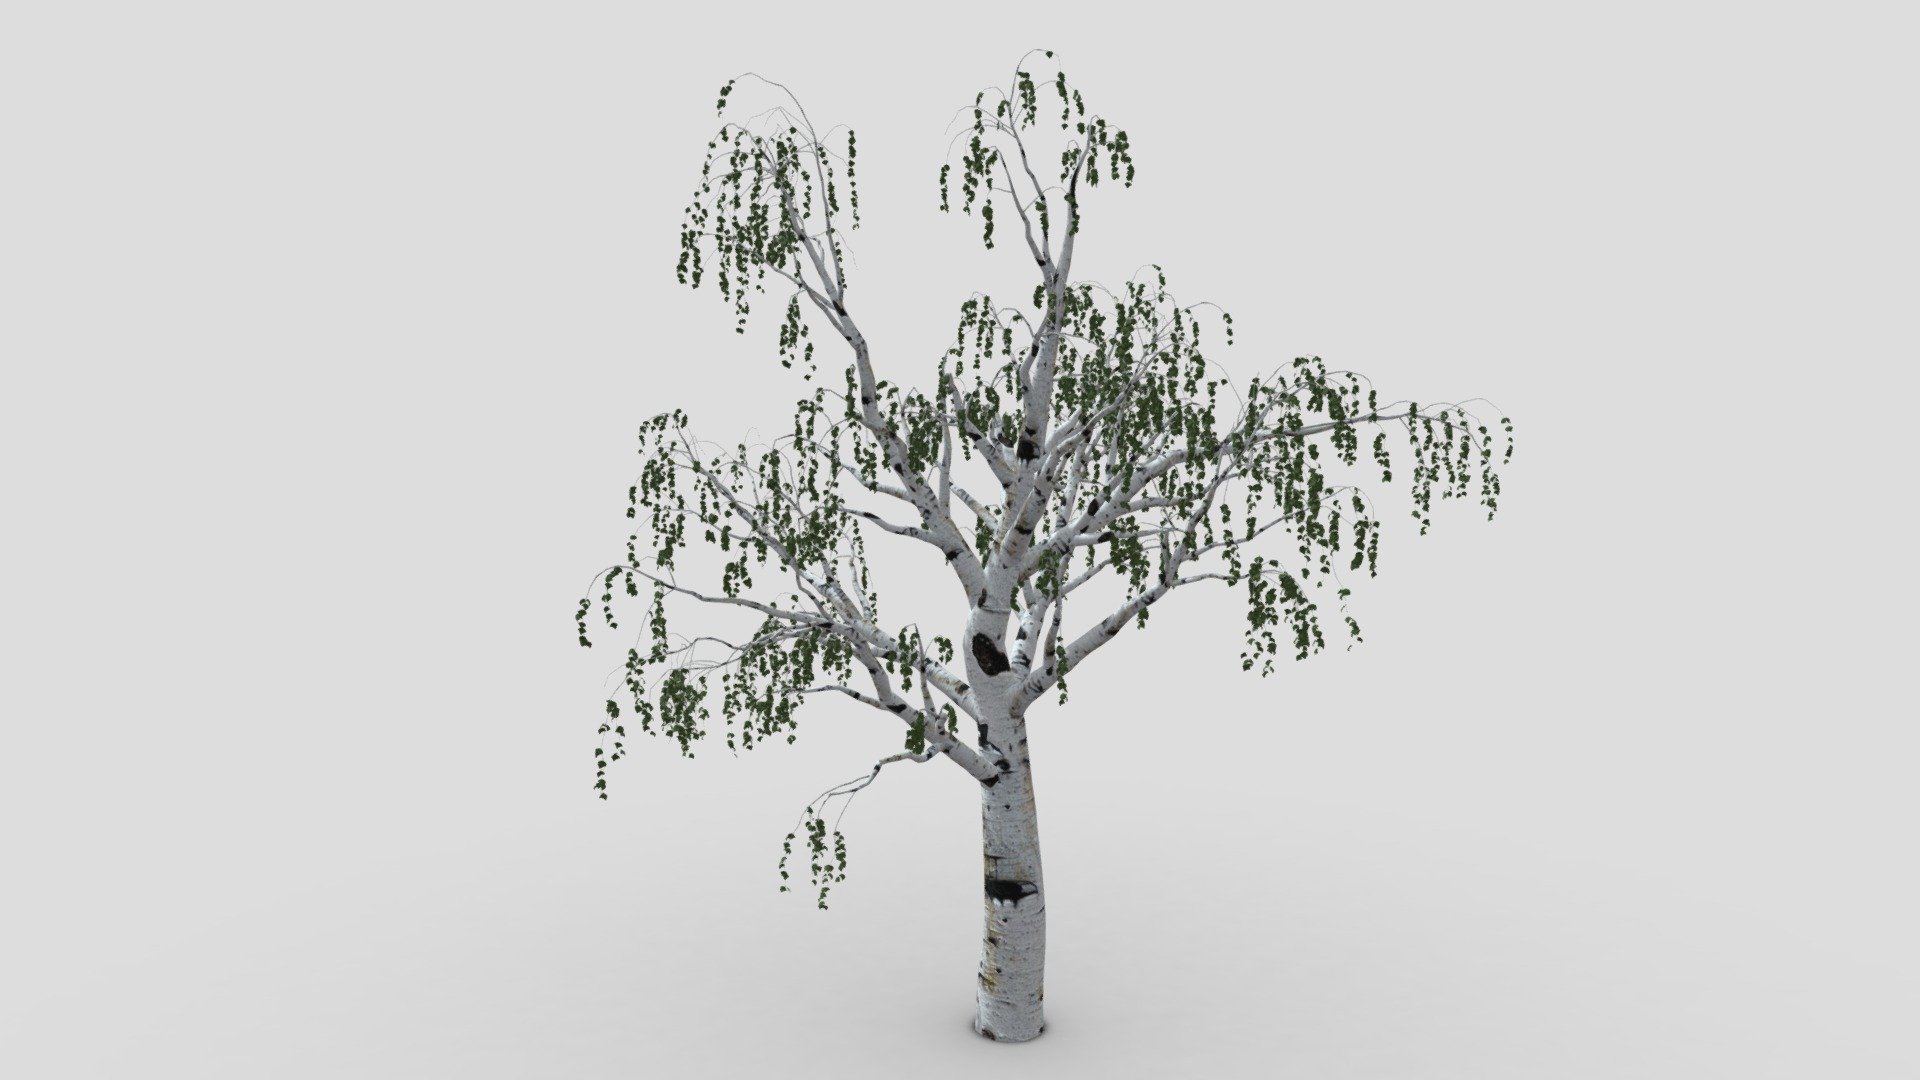 Betula pendula, commonly known as silver birch, warty birch, European white birch, or East Asian white birch, is a species of tree in the family Betulaceae, native to Europe and parts of Asia, though in southern Europe, it is only found at higher altitudes 3d model